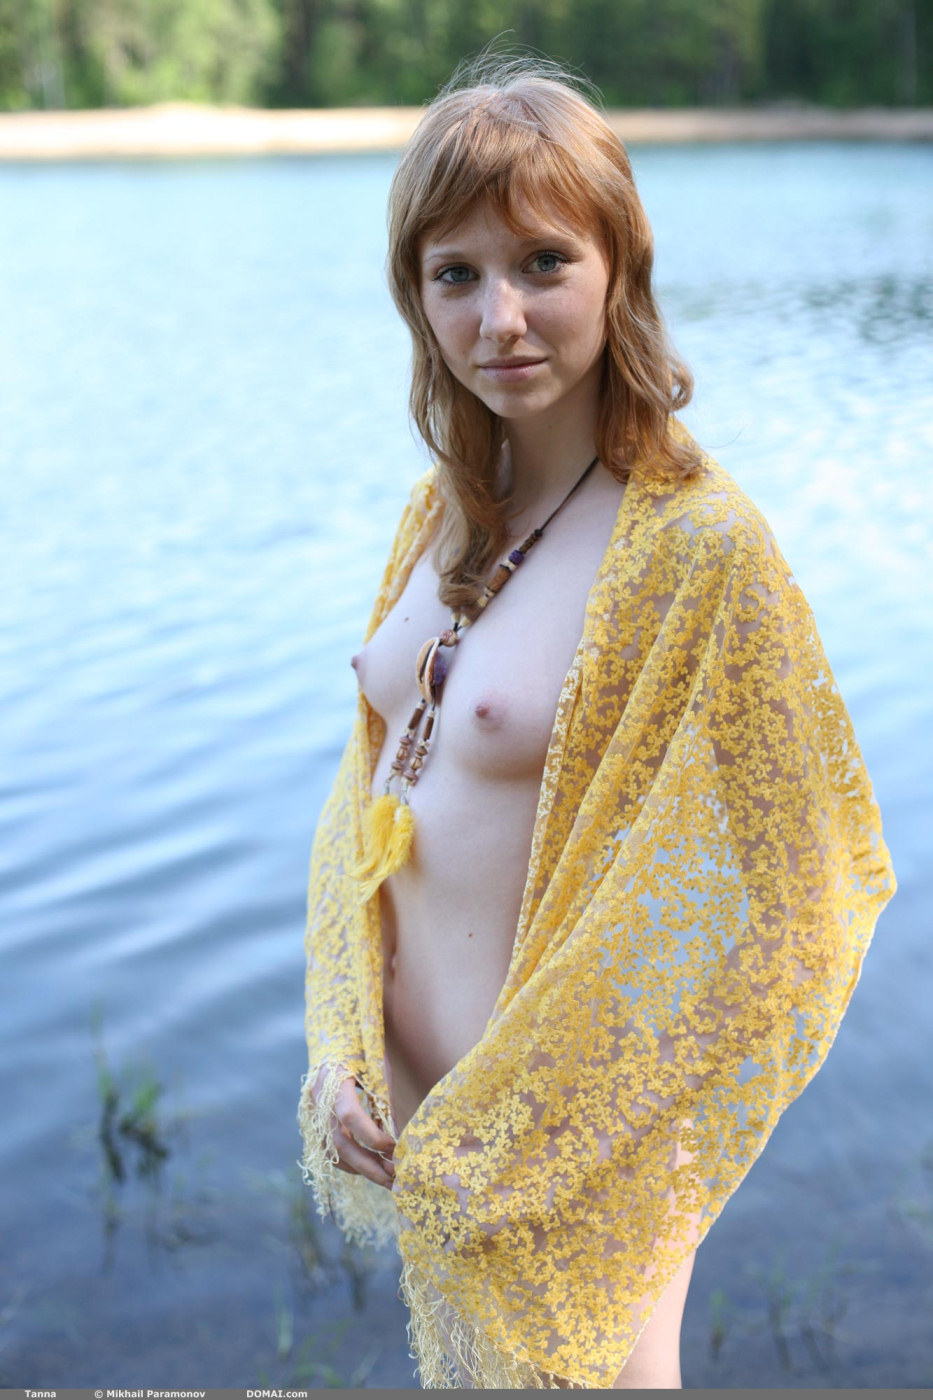 Redhead sexy Tanna is nude by the lake - 18-Tanna-2-5219 from Domai